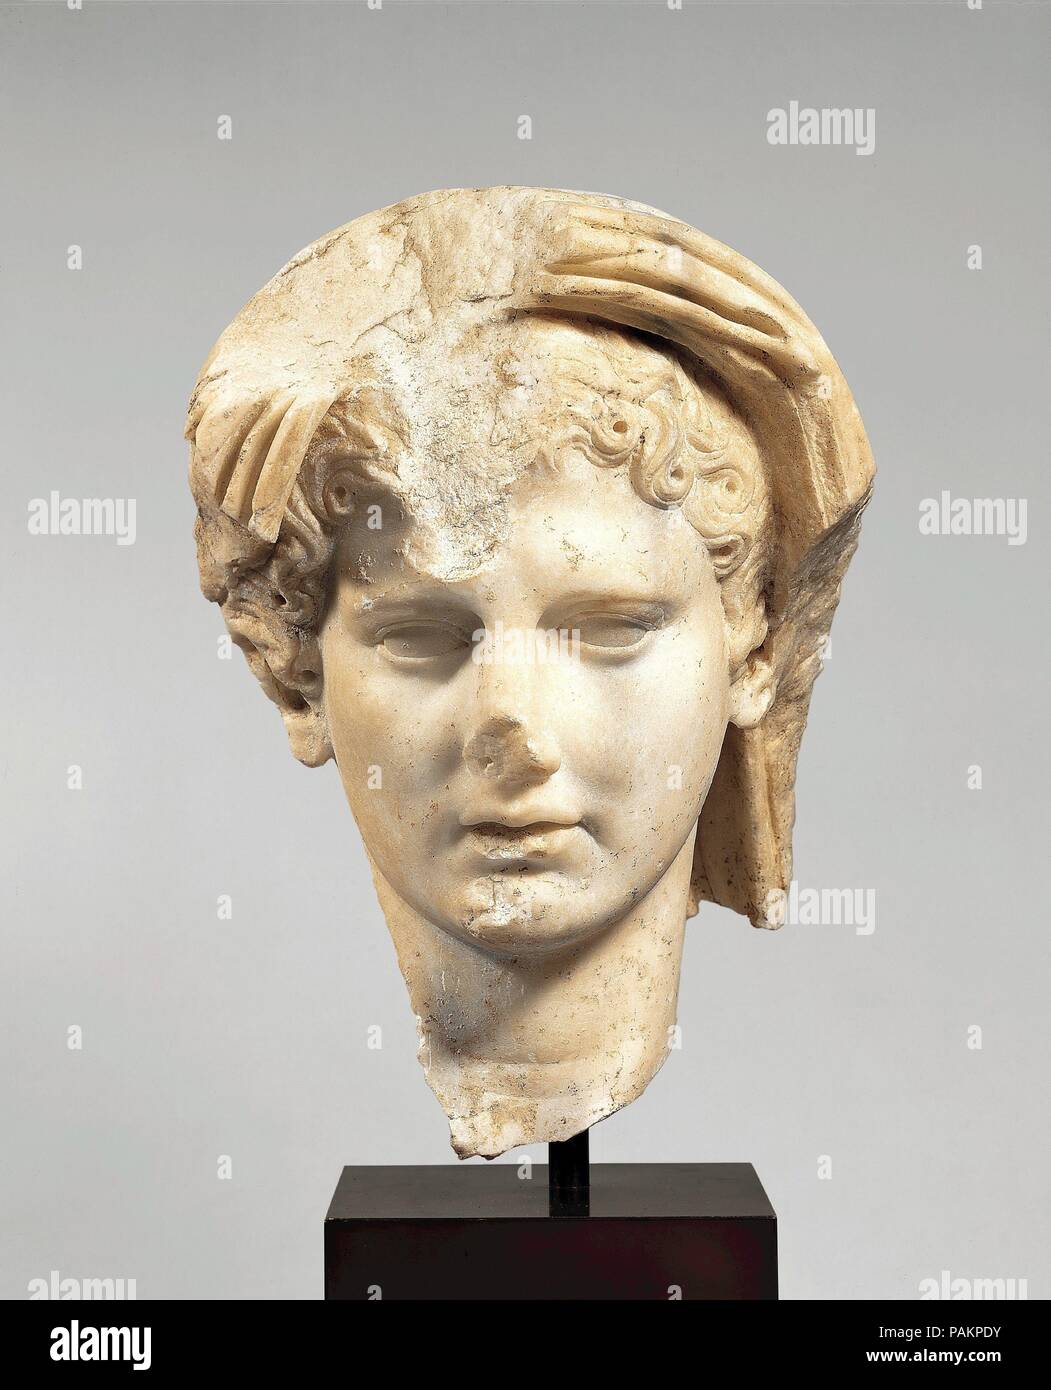 Marble head of a veiled man. Culture: Roman. Dimensions: H. 10 in. (25.4 cm). Date: 1st half of 1st century A.D..  The emperor was the chief state priest, and many statues show him in the act of prayer or sacrifice, with a fold of his toga pulled up to cover his head as a mark of  piety. However, this highly idealized head may represent the Genius, or protective spirit, of the living emperor. Traditionally the protective spirit of every Roman household was worshiped at the family shrine. It was represented by a statuette with veiled head holding implements of sacrifice. Similar veneration of t Stock Photo